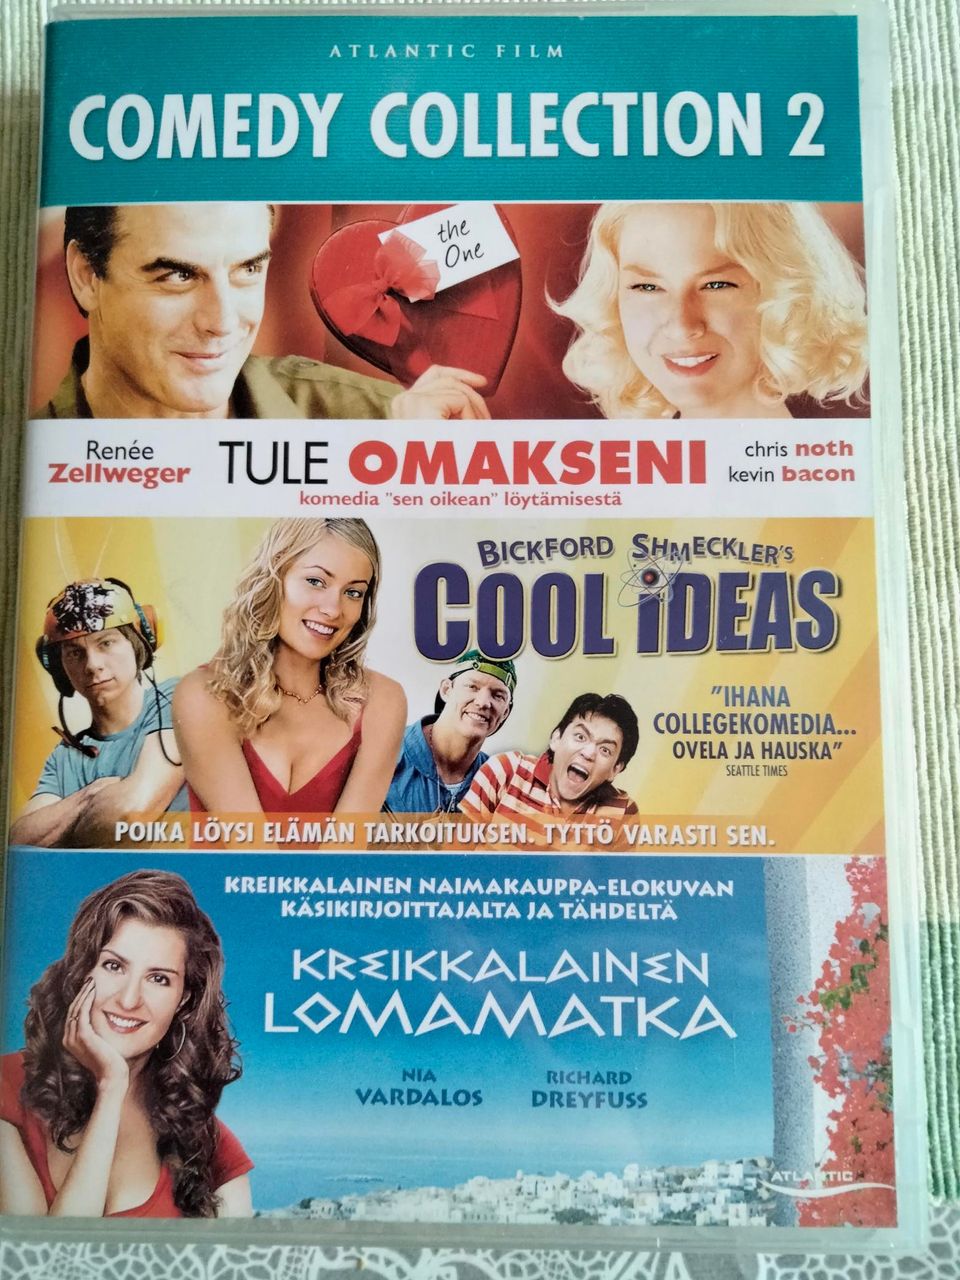 Comedy collection 2